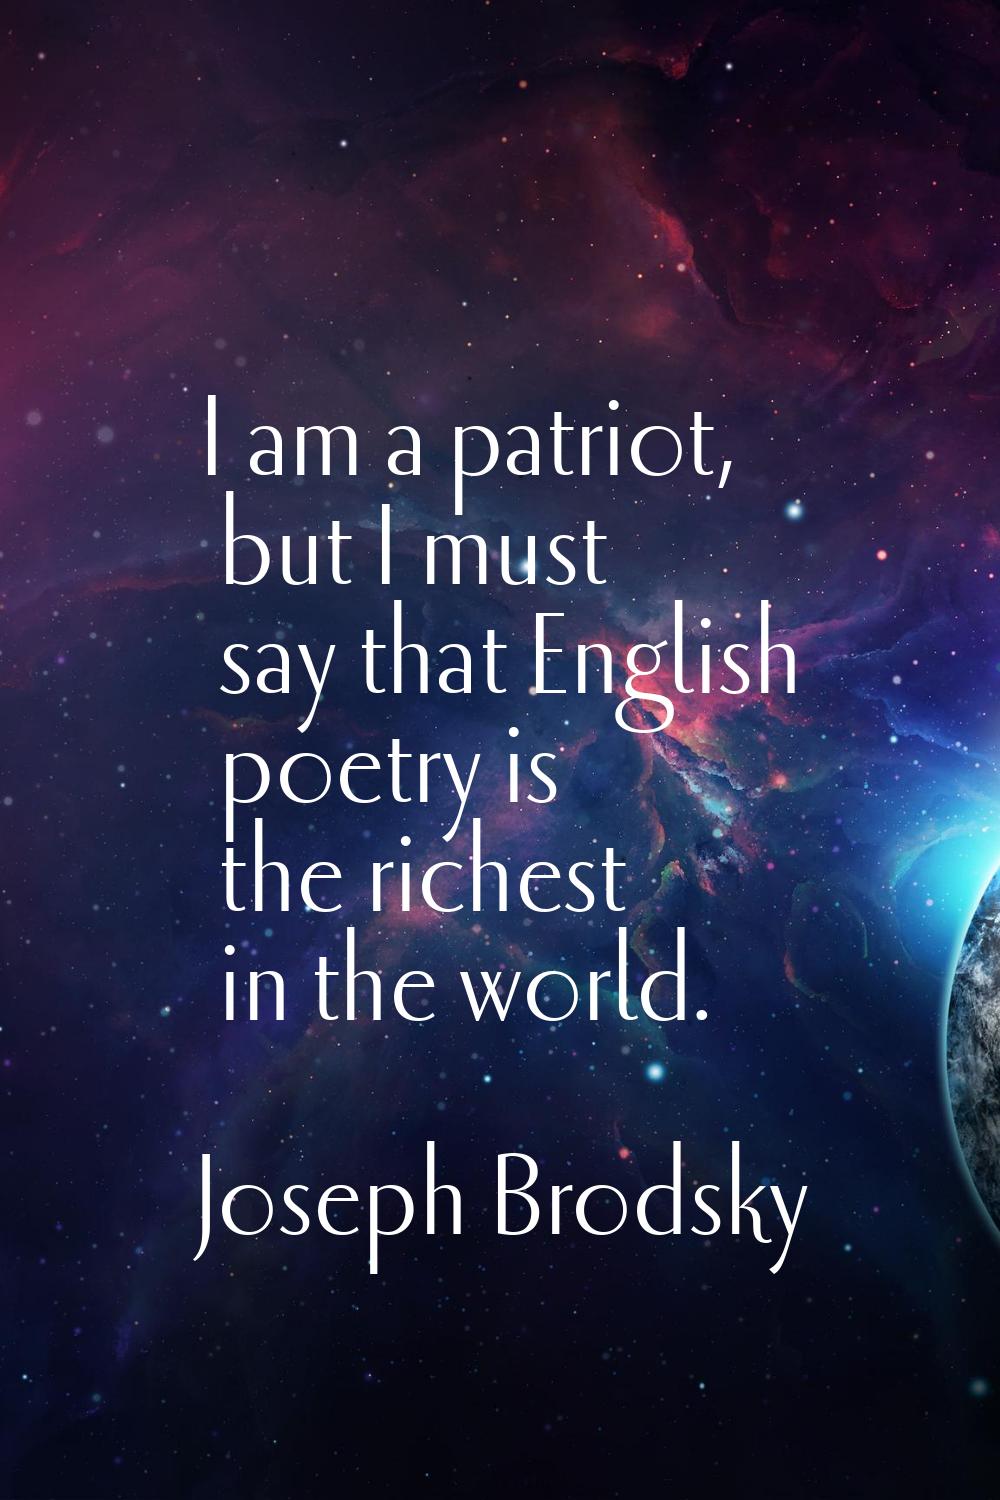 I am a patriot, but I must say that English poetry is the richest in the world.